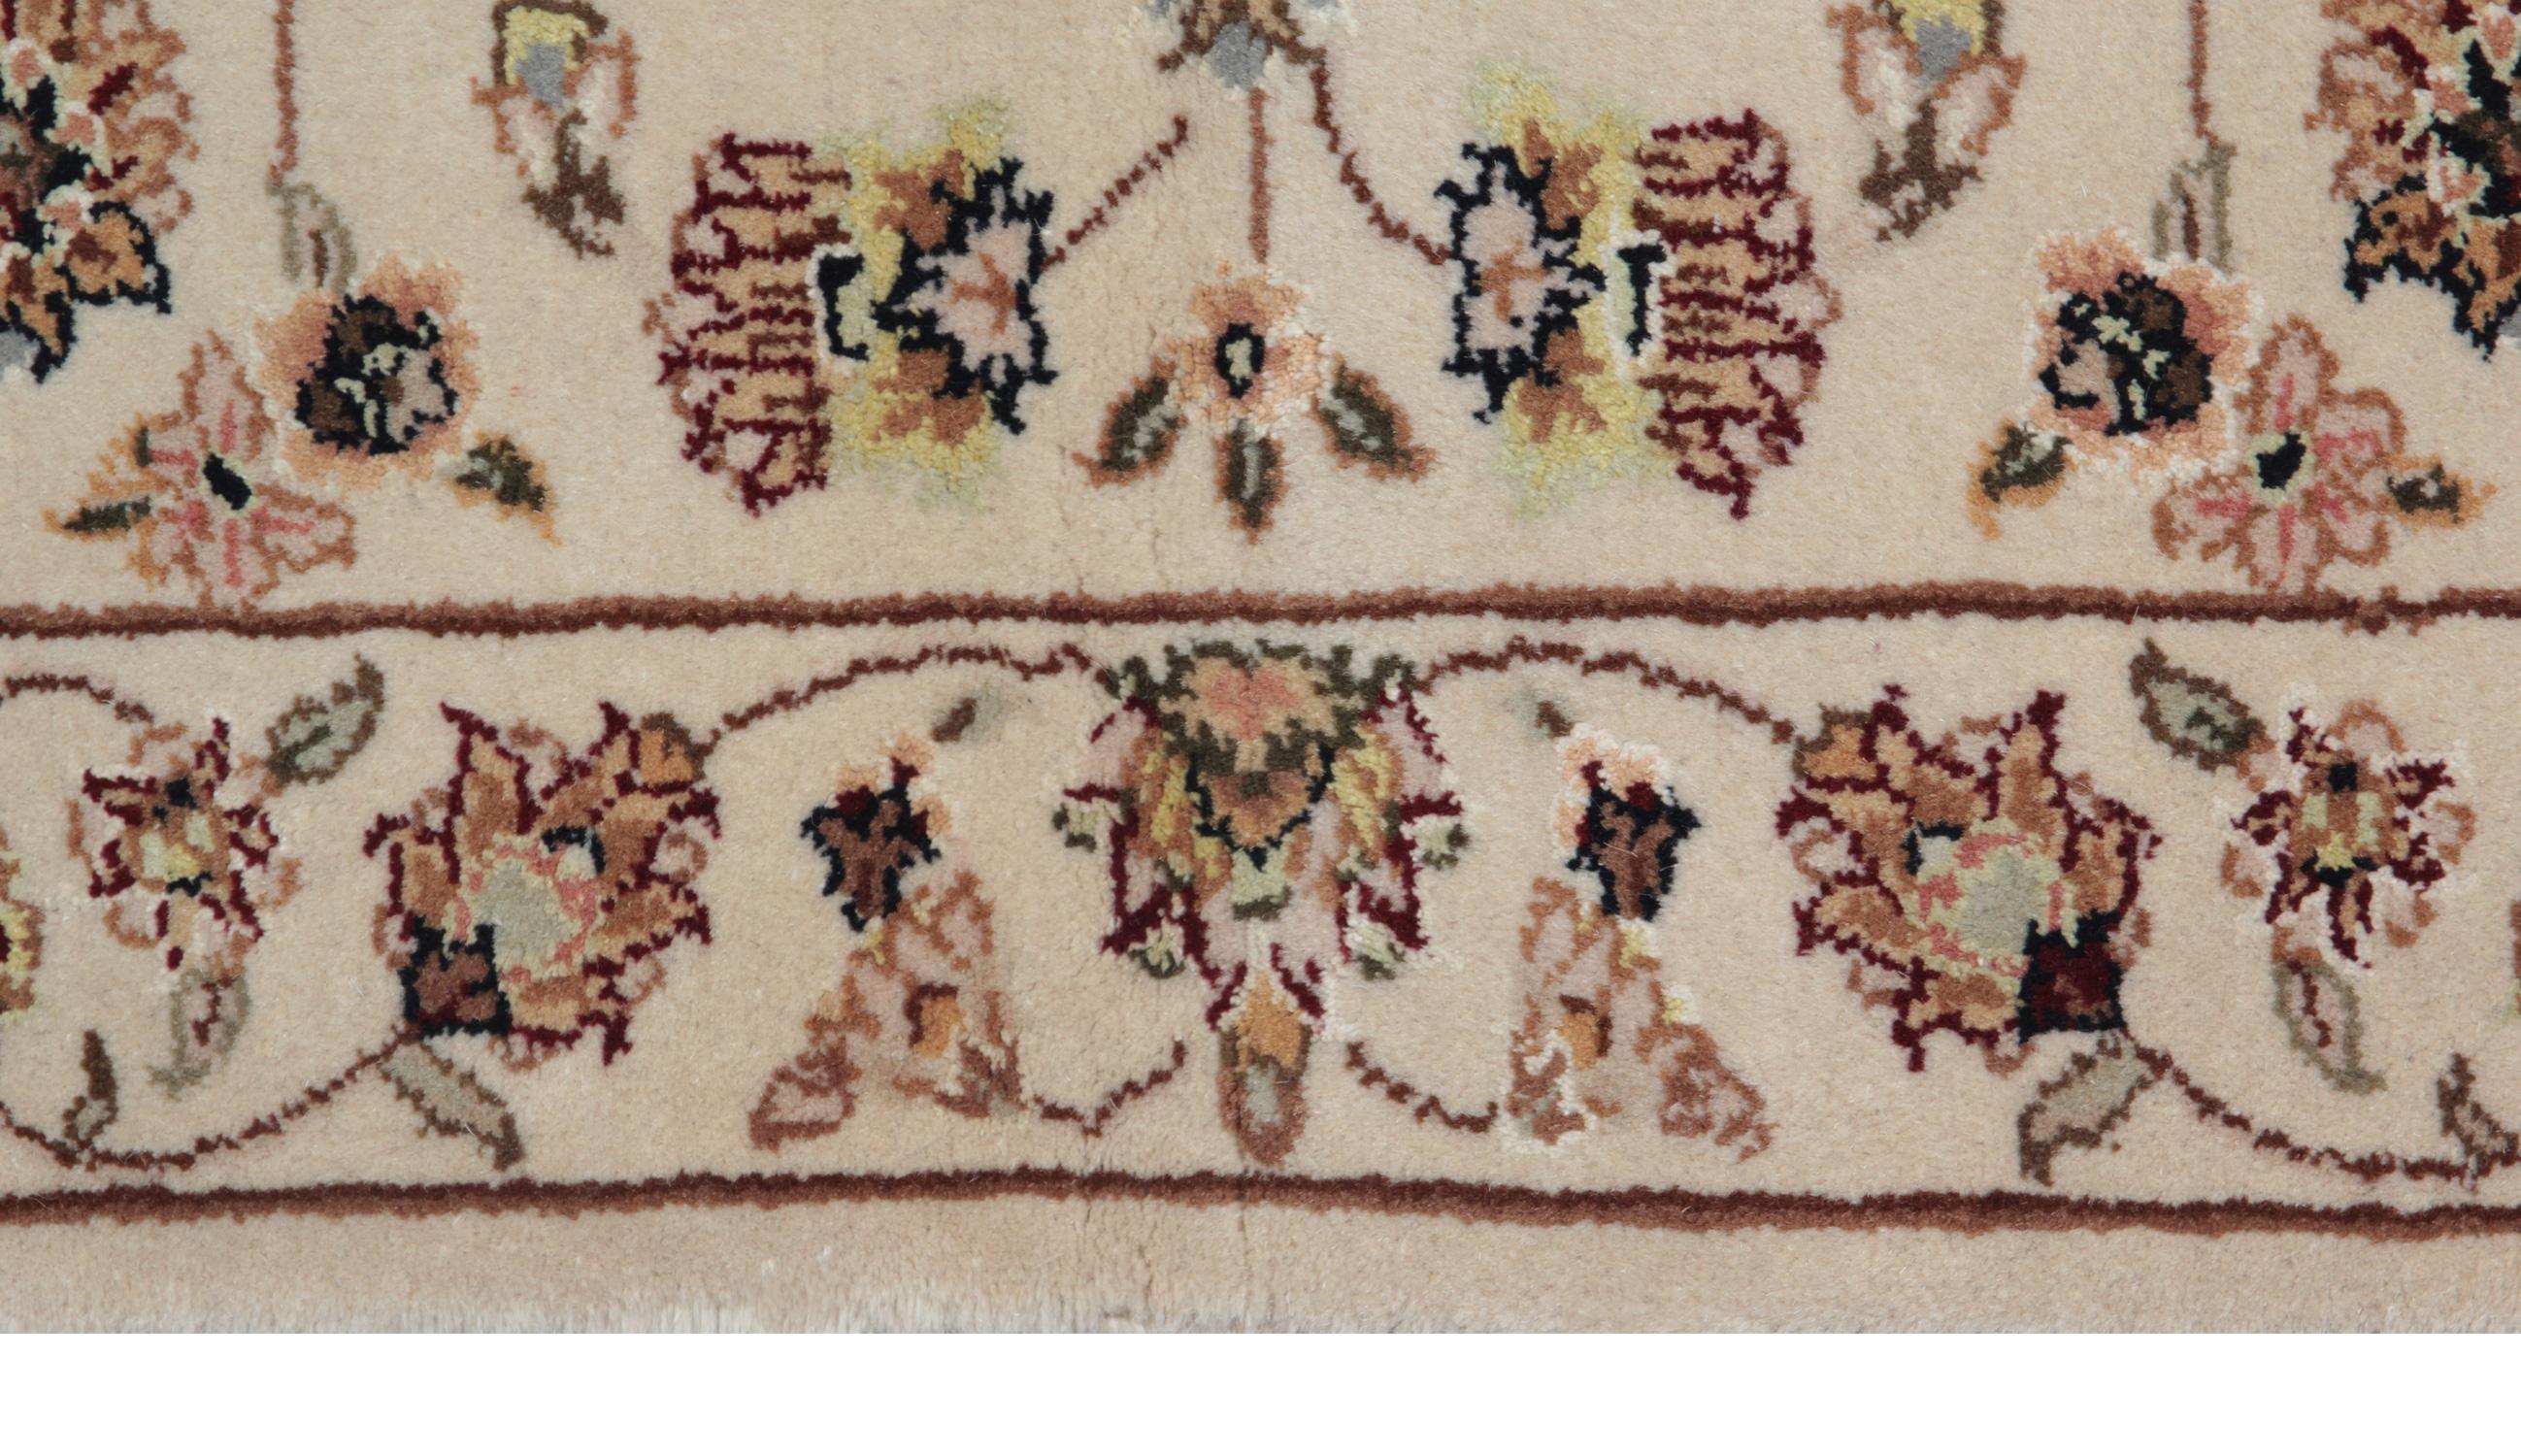 This handwoven Indian rug is a Ziegler style Sultanabad carpet rug made on our looms by our master weavers in India. These handmade carpet oriental rugs have been made with all-natural veg dyes and hand-spun wool. The large scale design makes